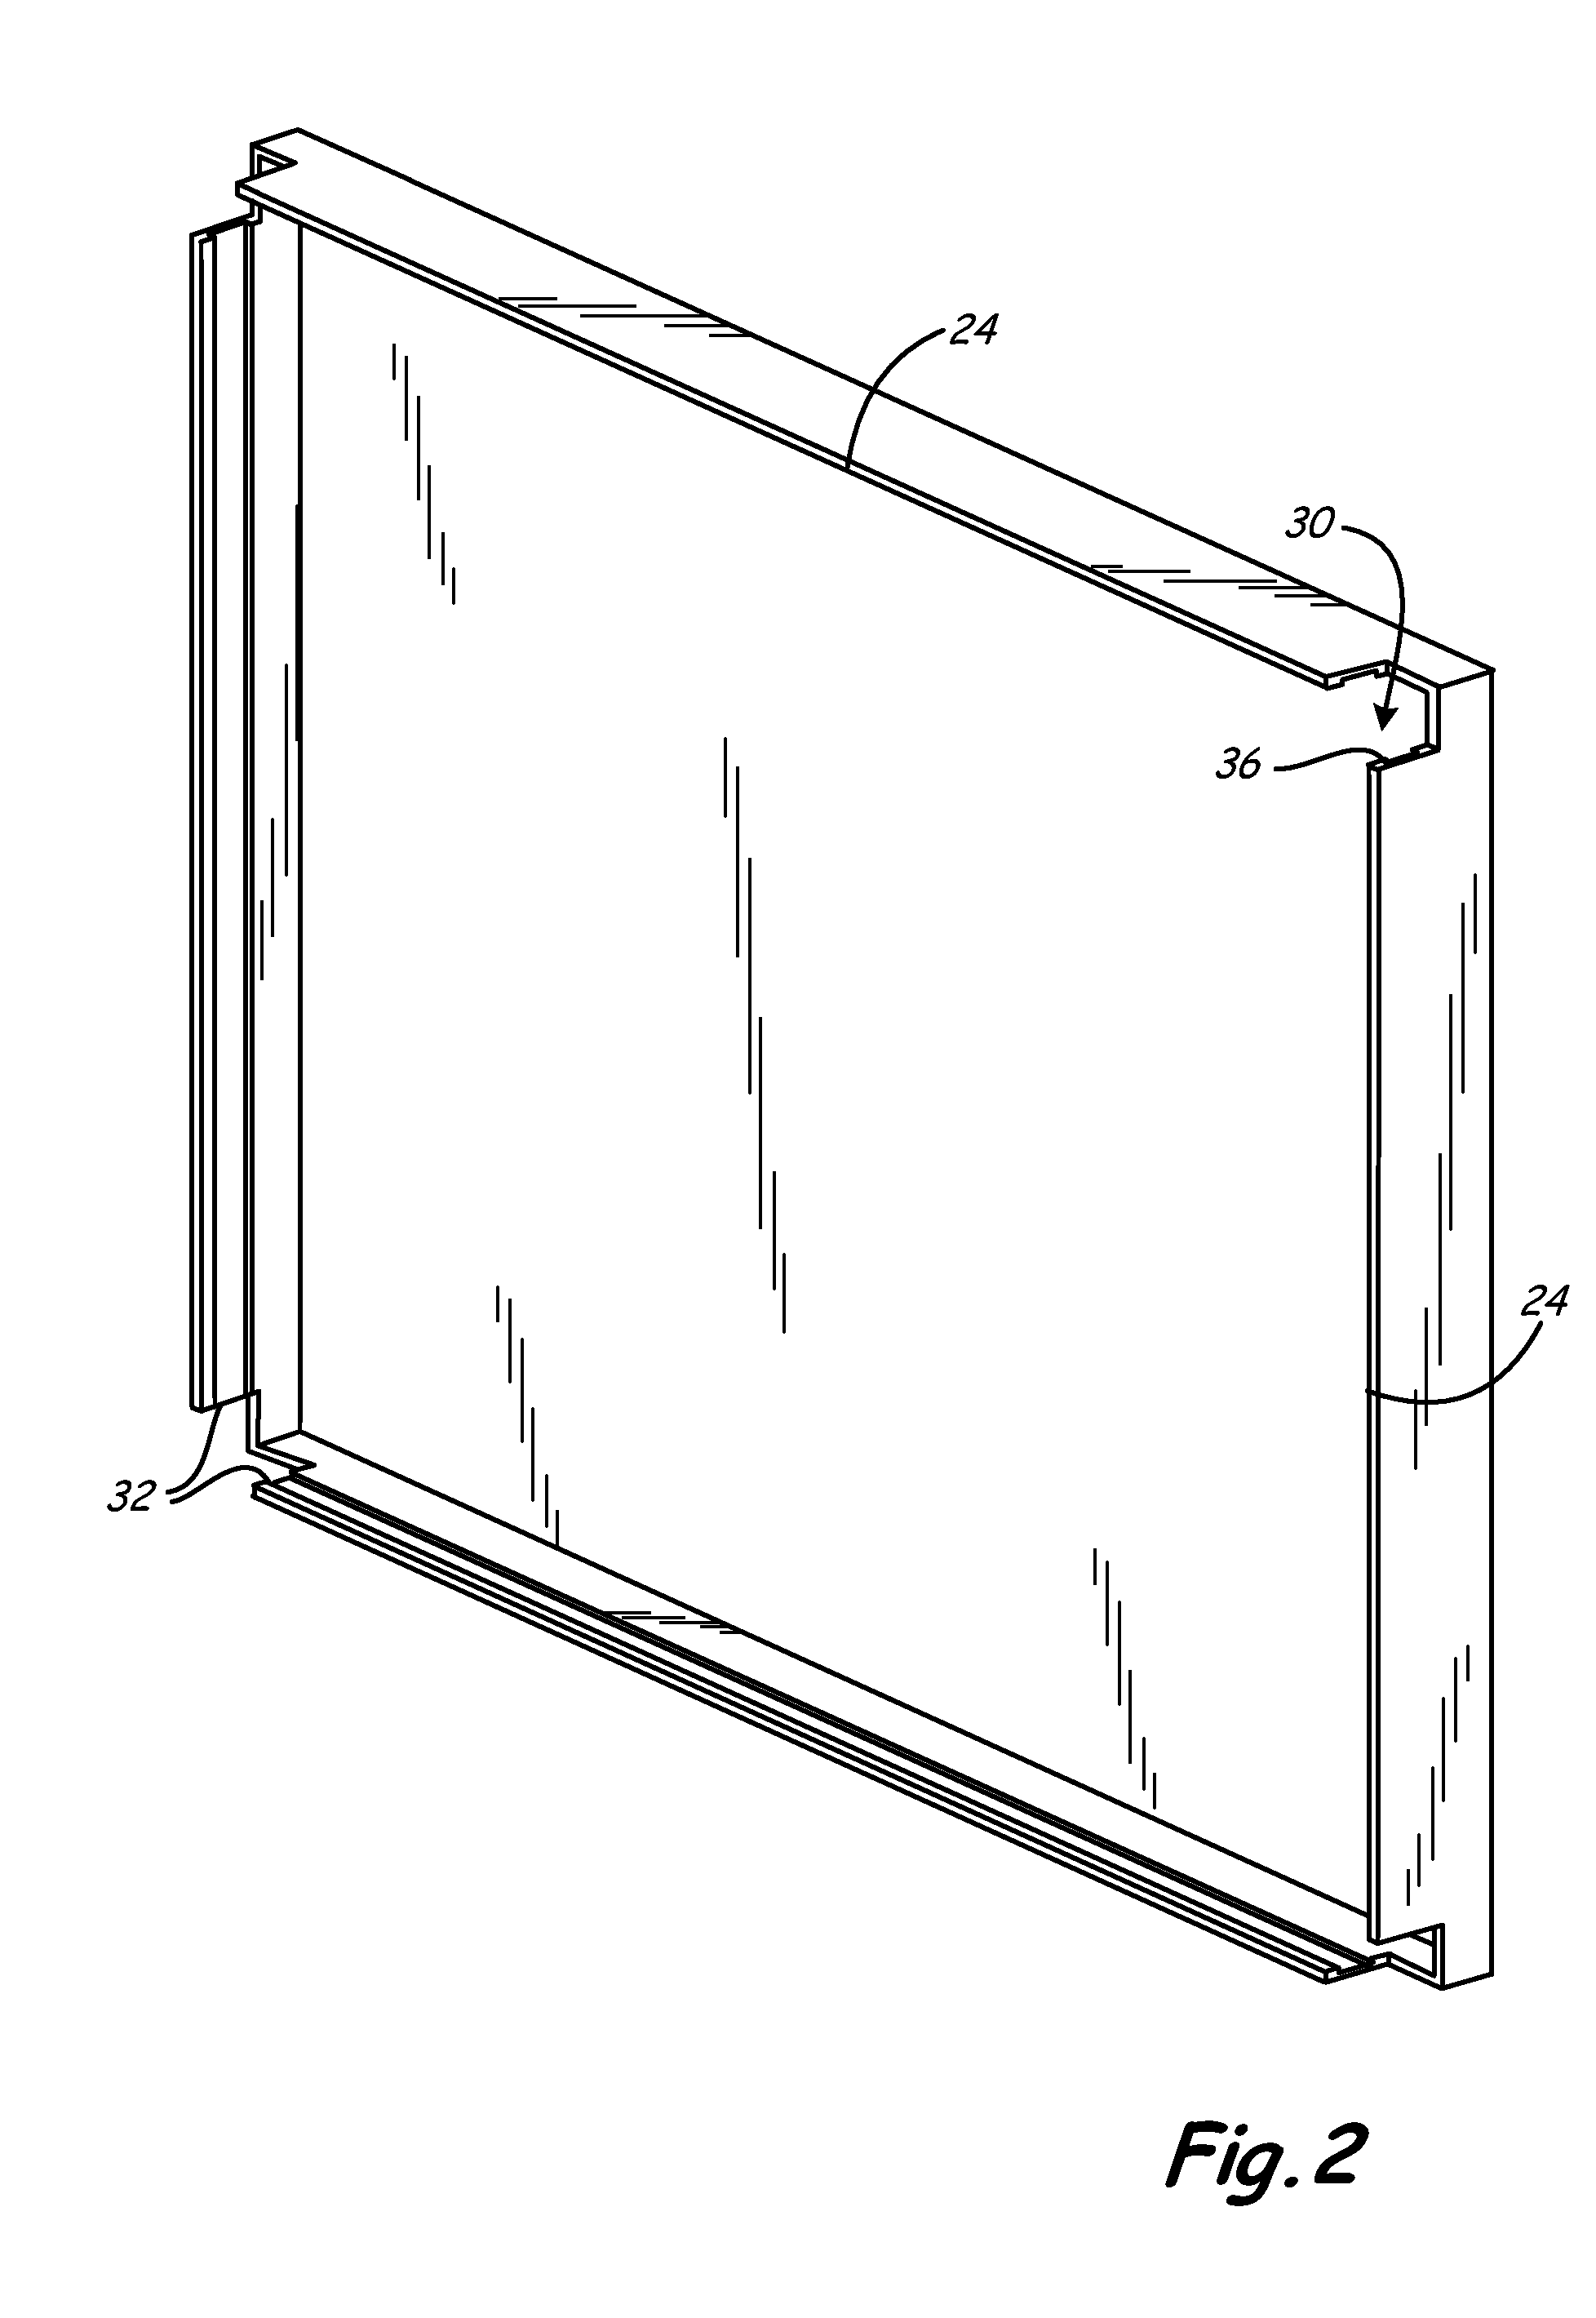 Wall panel assembly